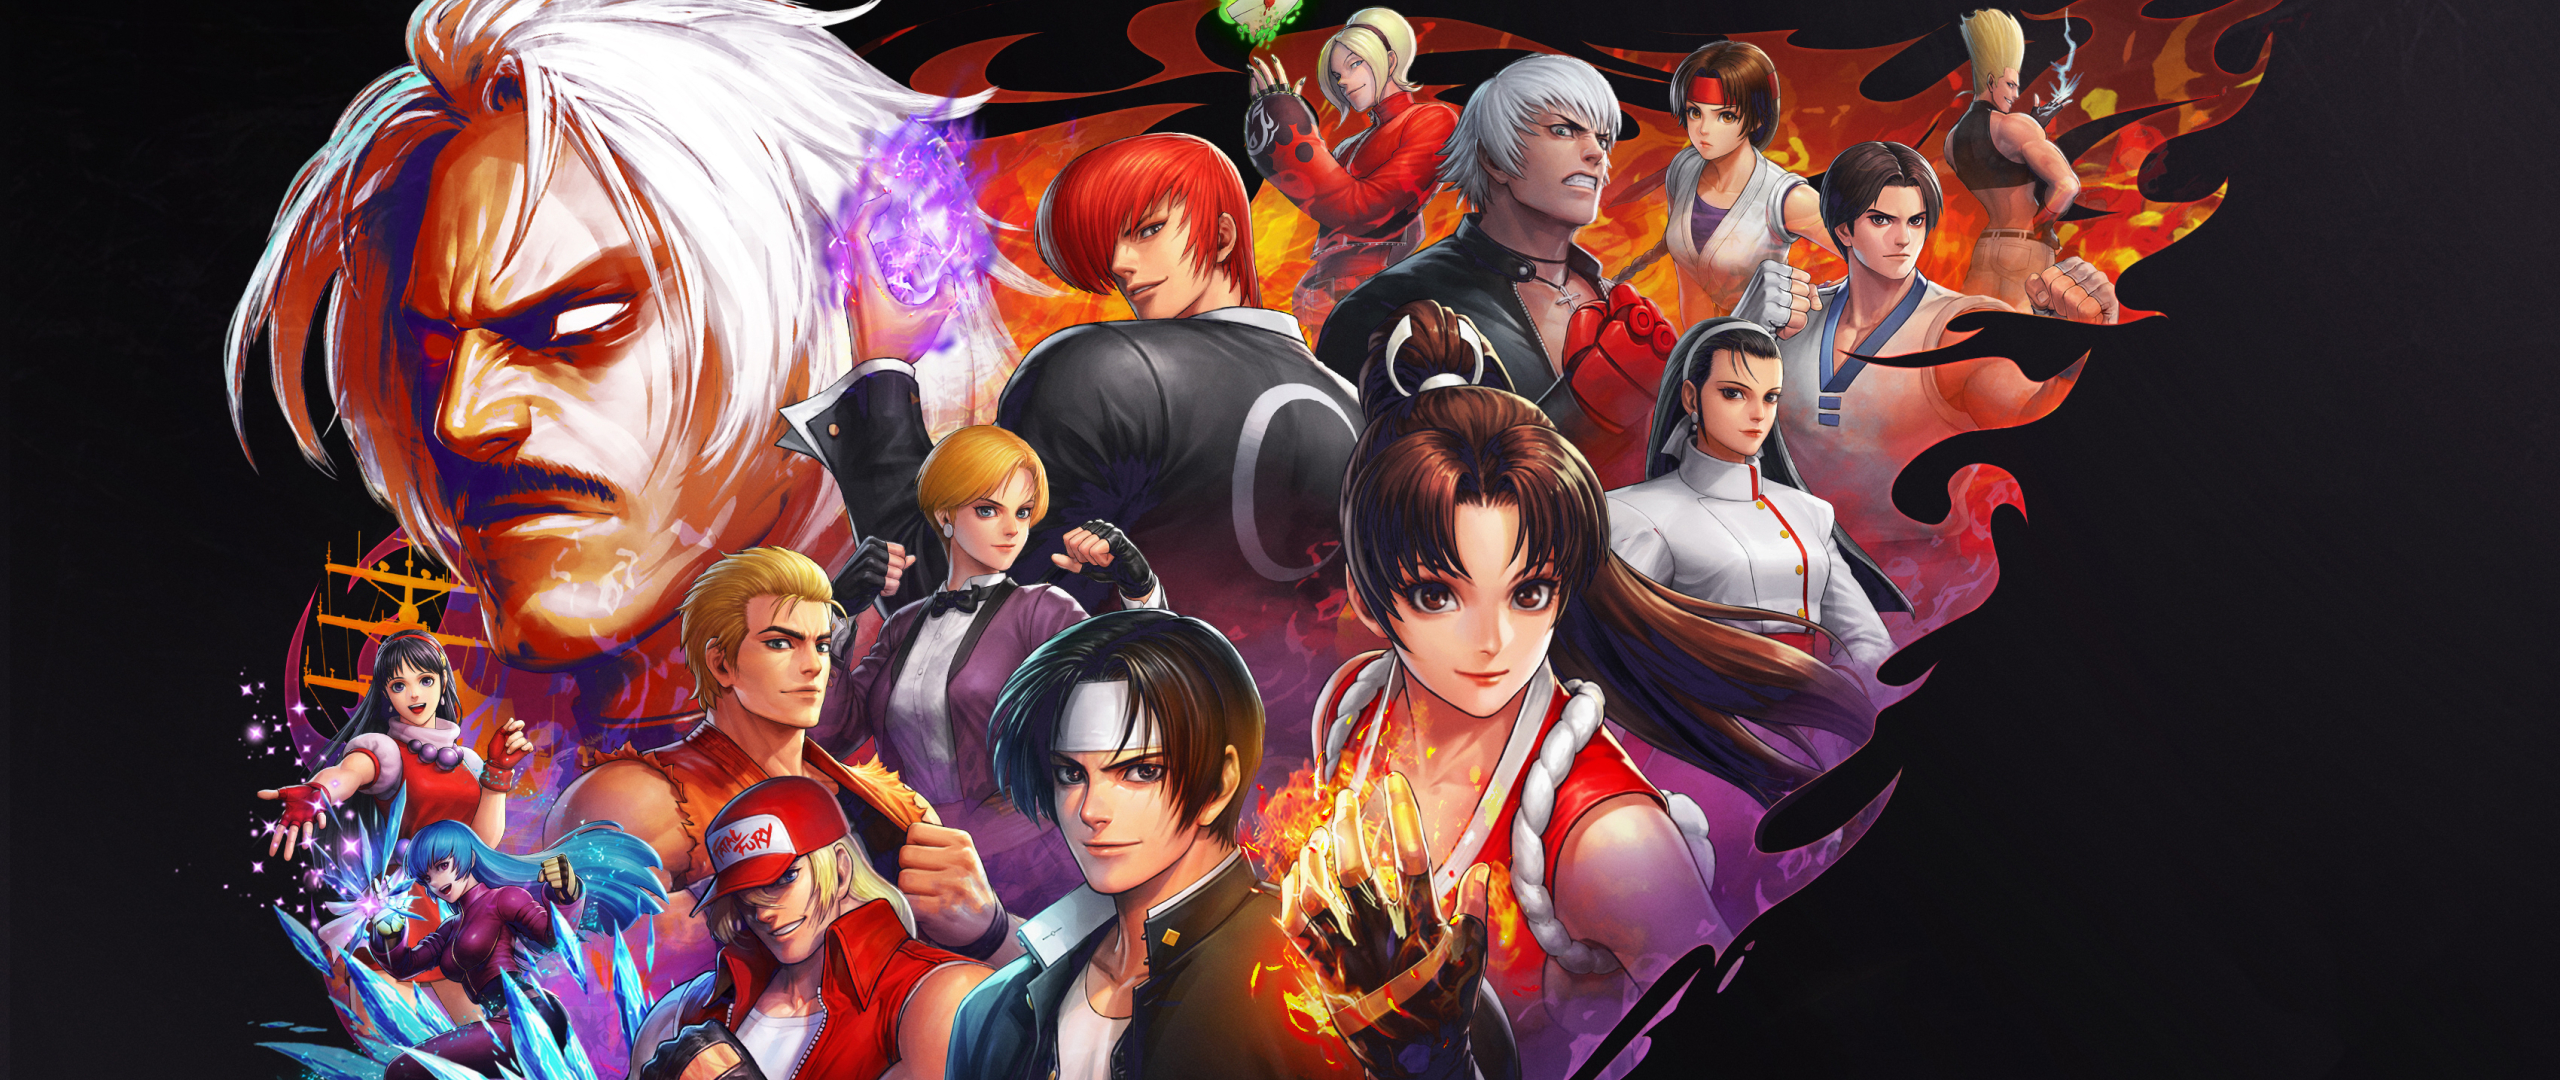 2560x1080 The King Of Fighters 2560x1080 Resolution ...